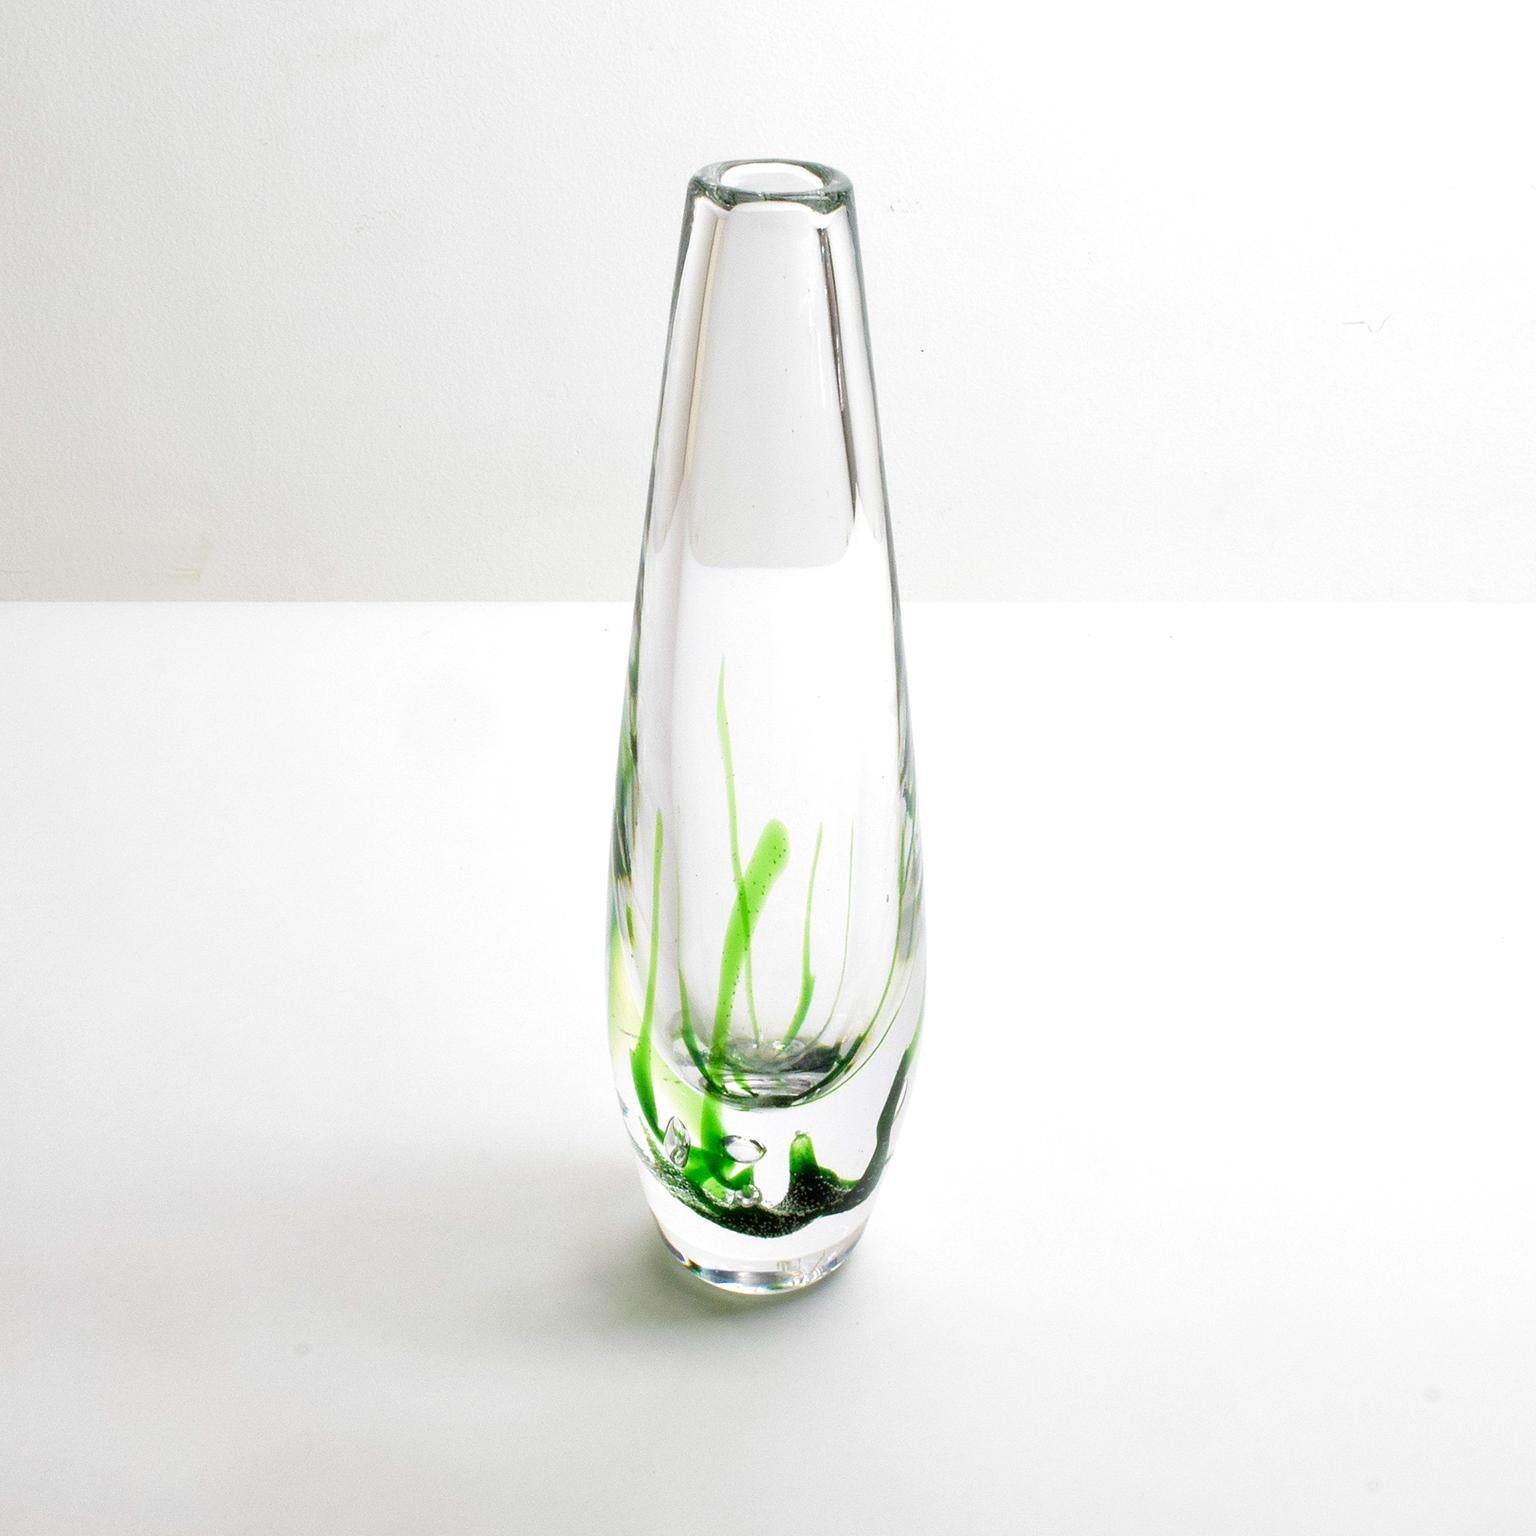 Vicke Lindstrand clear glass vase with green streaks from his “Seaweed Series” for Kosta Glassworks, Sweden, 1960. 

Vicke Lindstrand was a master of form and applied decoration. His glass and ceramic works during his career reflect his